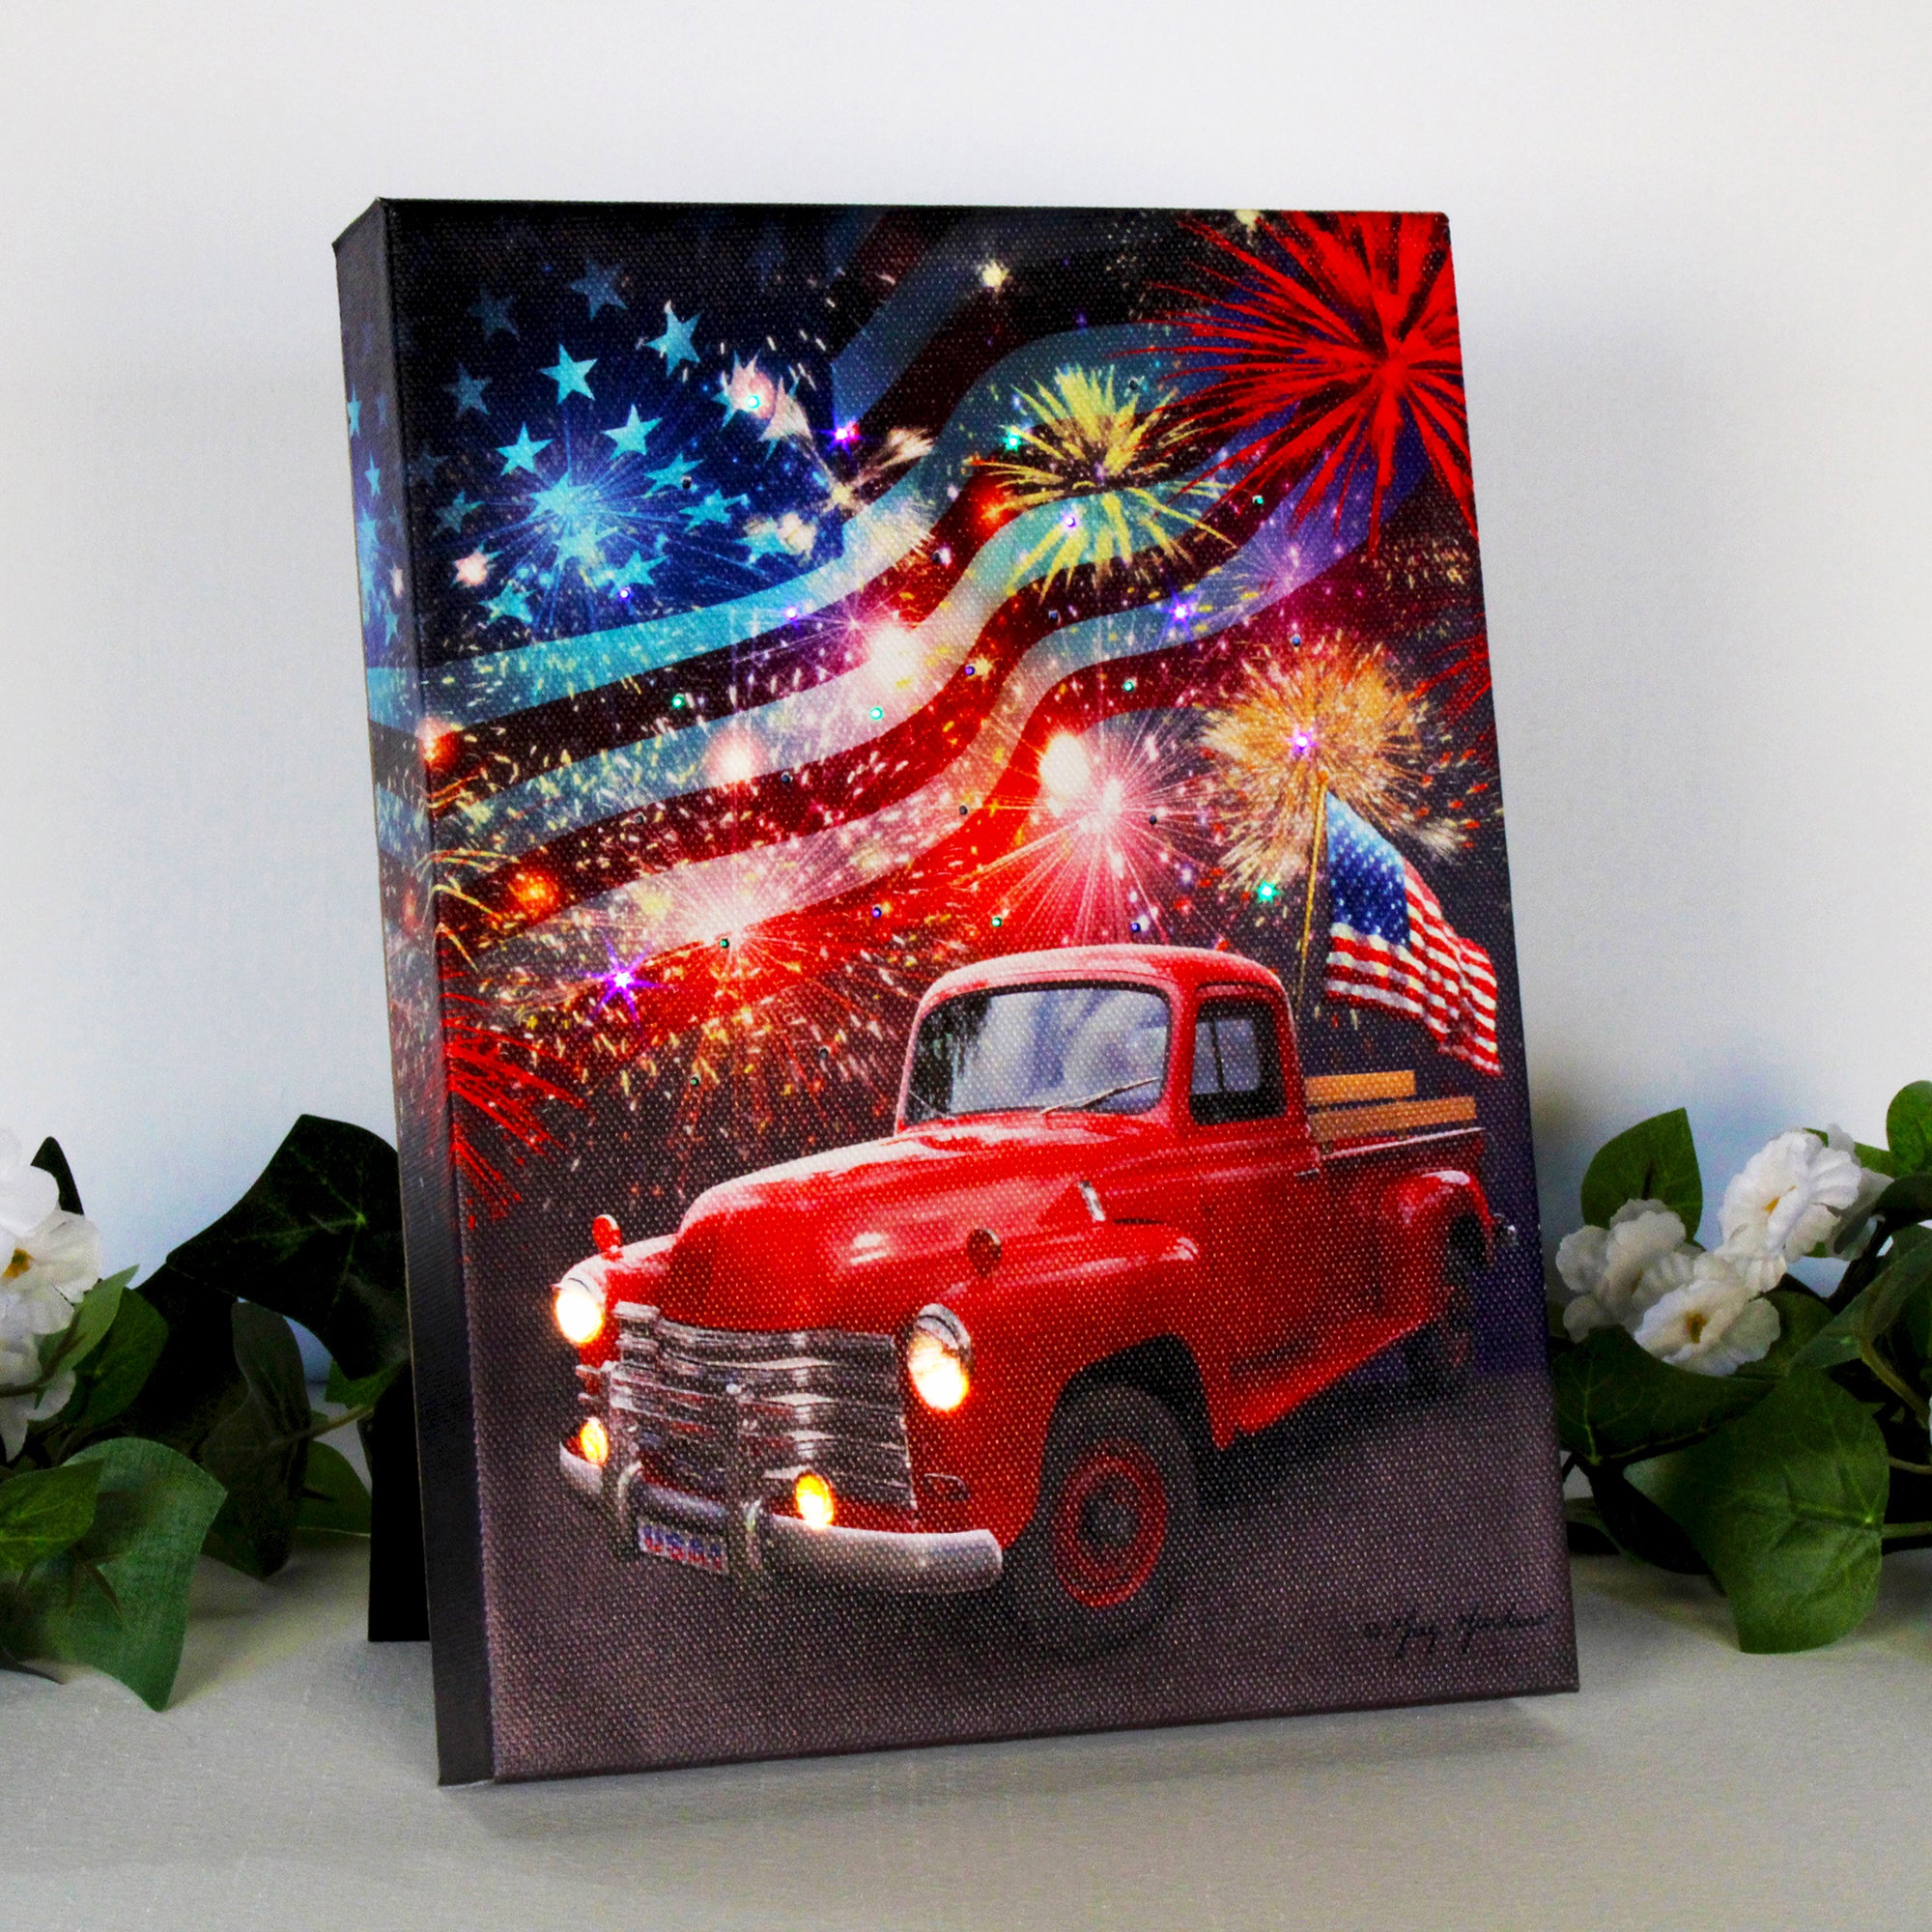 This stunning canvas captures the essence of a patriotic summer evening, with an old fashioned red truck parked proudly and an American flag waving triumphantly in the bed of the truck.  As you gaze at the canvas, the colorful fireworks burst to life in a dazzling display of love and passion.